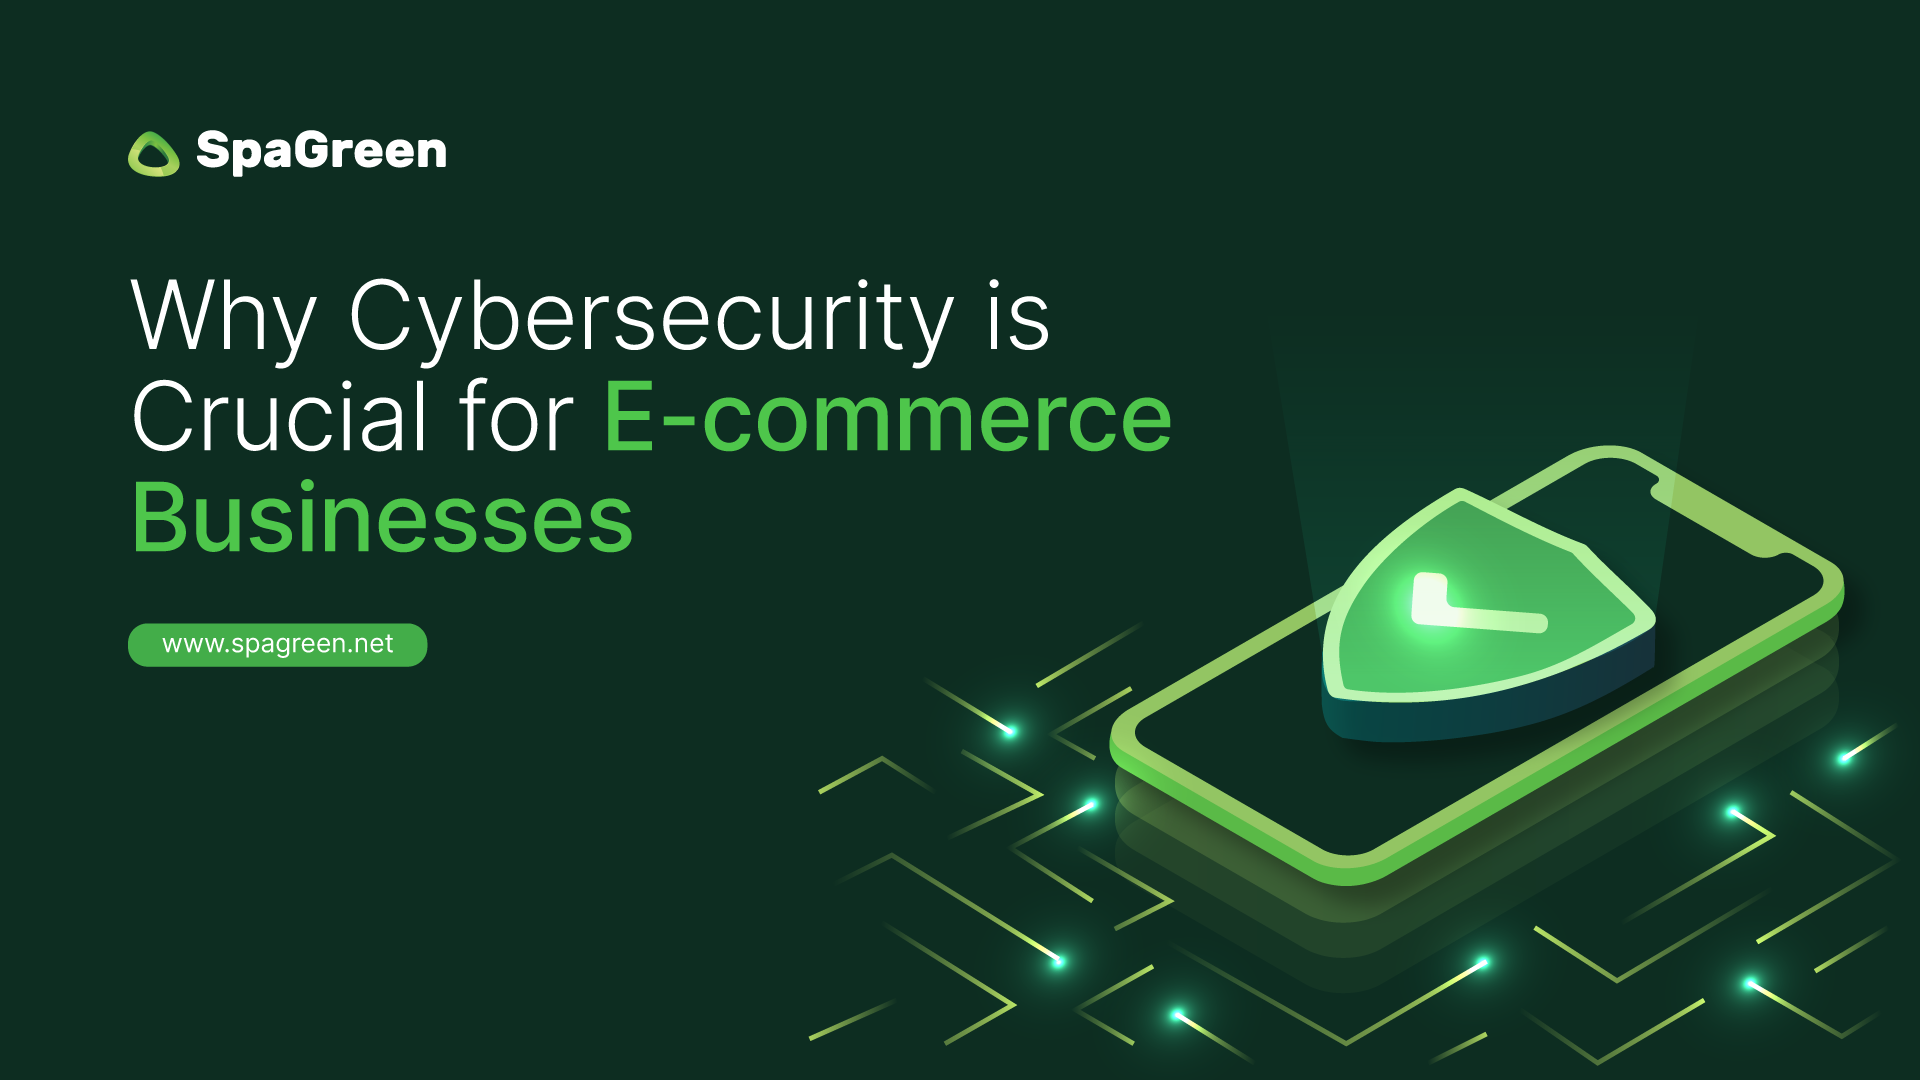 Why Cybersecurity is Crucial for E-commerce Businesses